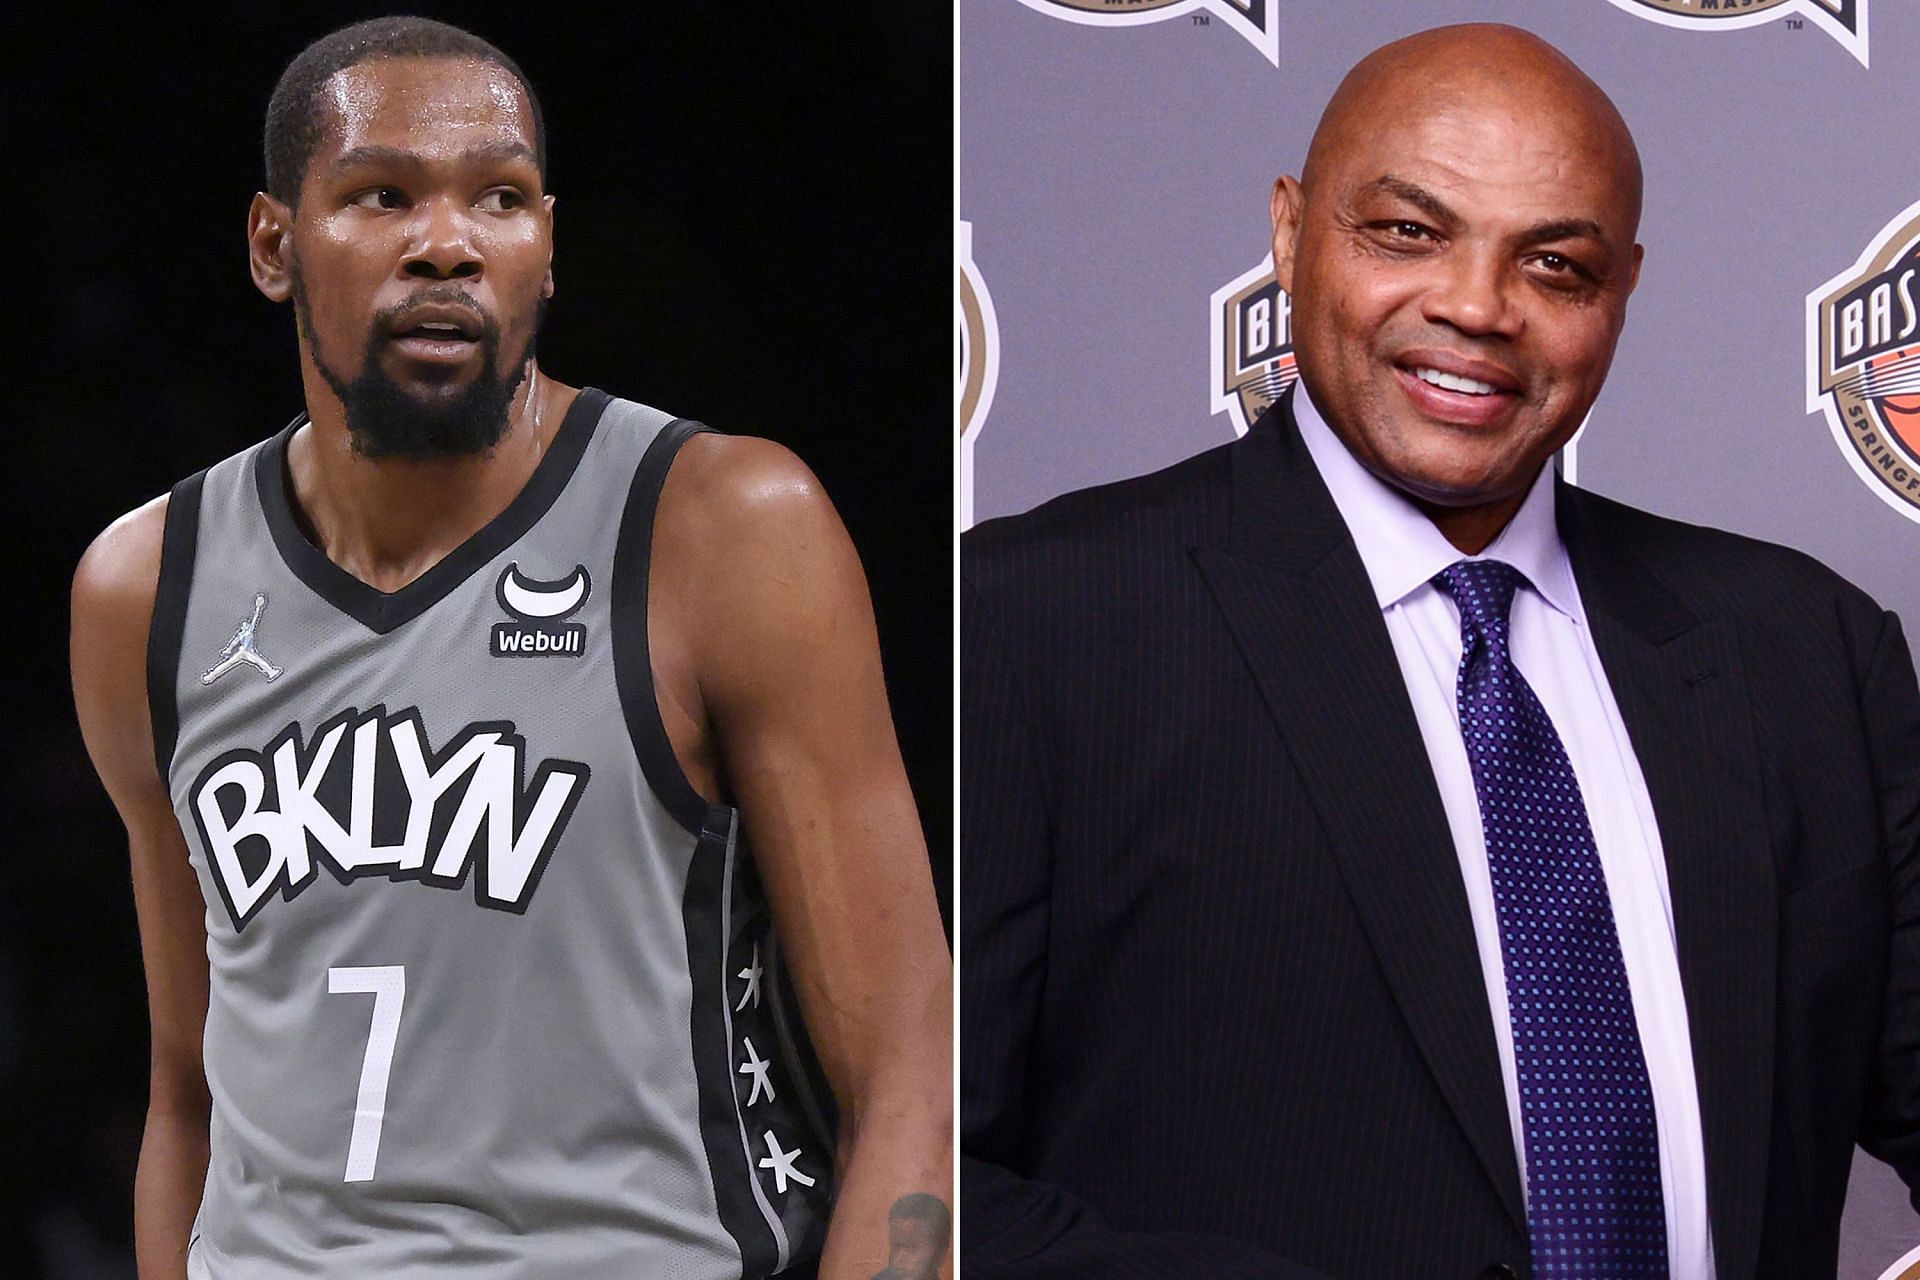 Charles Barkley and Kevin Durant had a recent public spat. [Photo: New York Post]